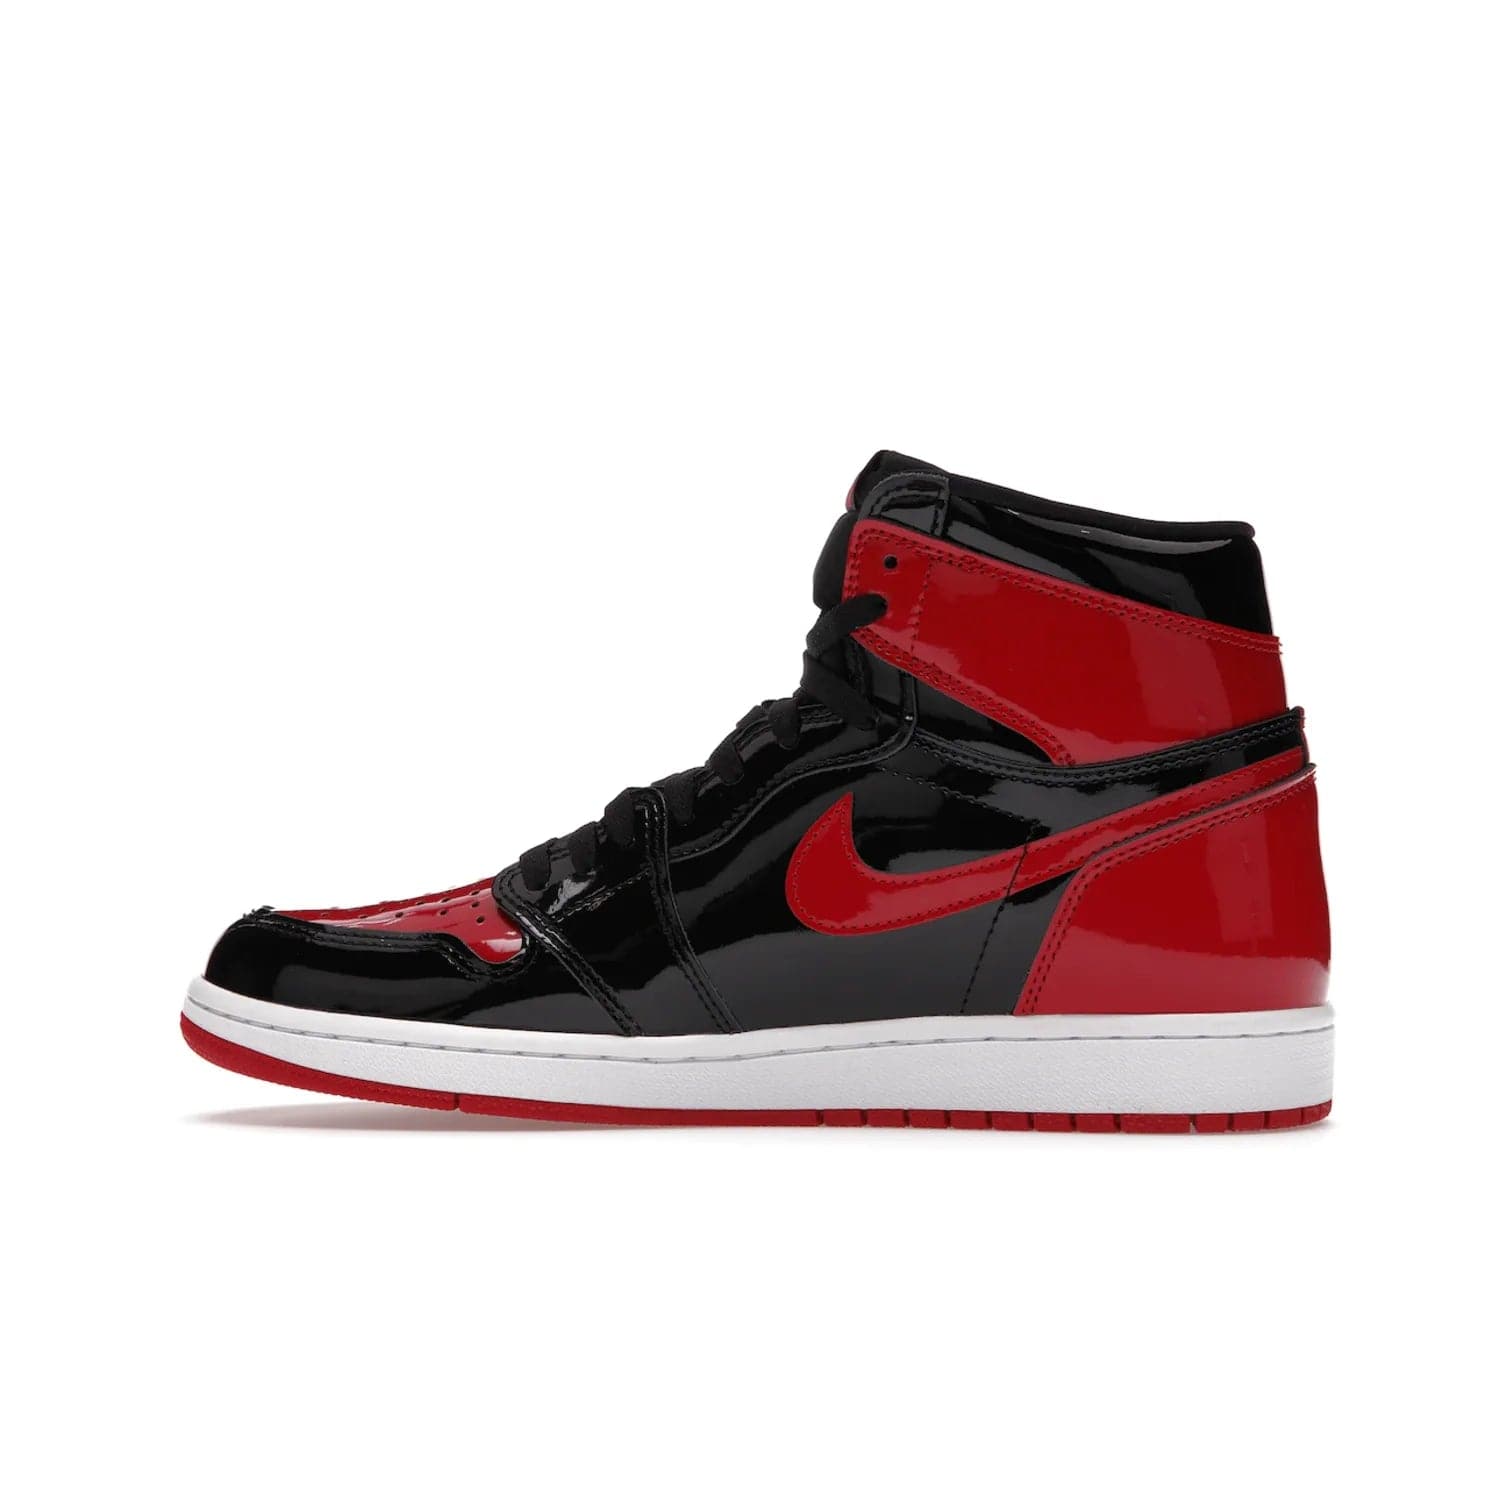 Jordan 1 Retro High OG Patent Bred - Image 20 - Only at www.BallersClubKickz.com - Introducing Air Jordan 1 Retro High OG Patent Bred - sleek patent leather upper, signature weaved Nike Air tongue and classic Wings logo on collar. Red and white sole complete signature look. Releasing December 2021 - perfect retro edition for holidays.